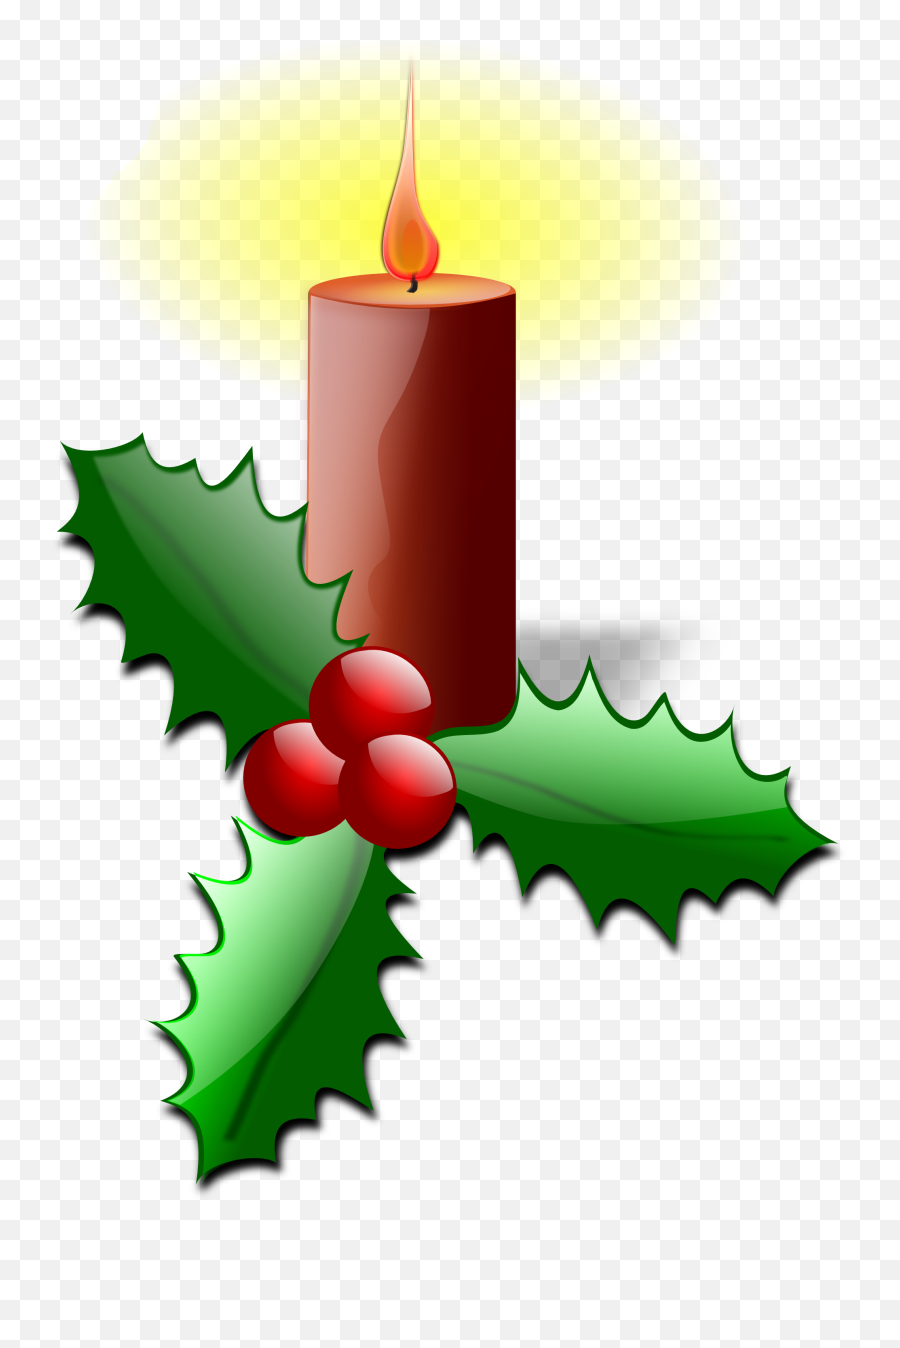 Christmas Clip Art 0010 Png Images - Christmas Designs Clip Art,Christmas Candle Png